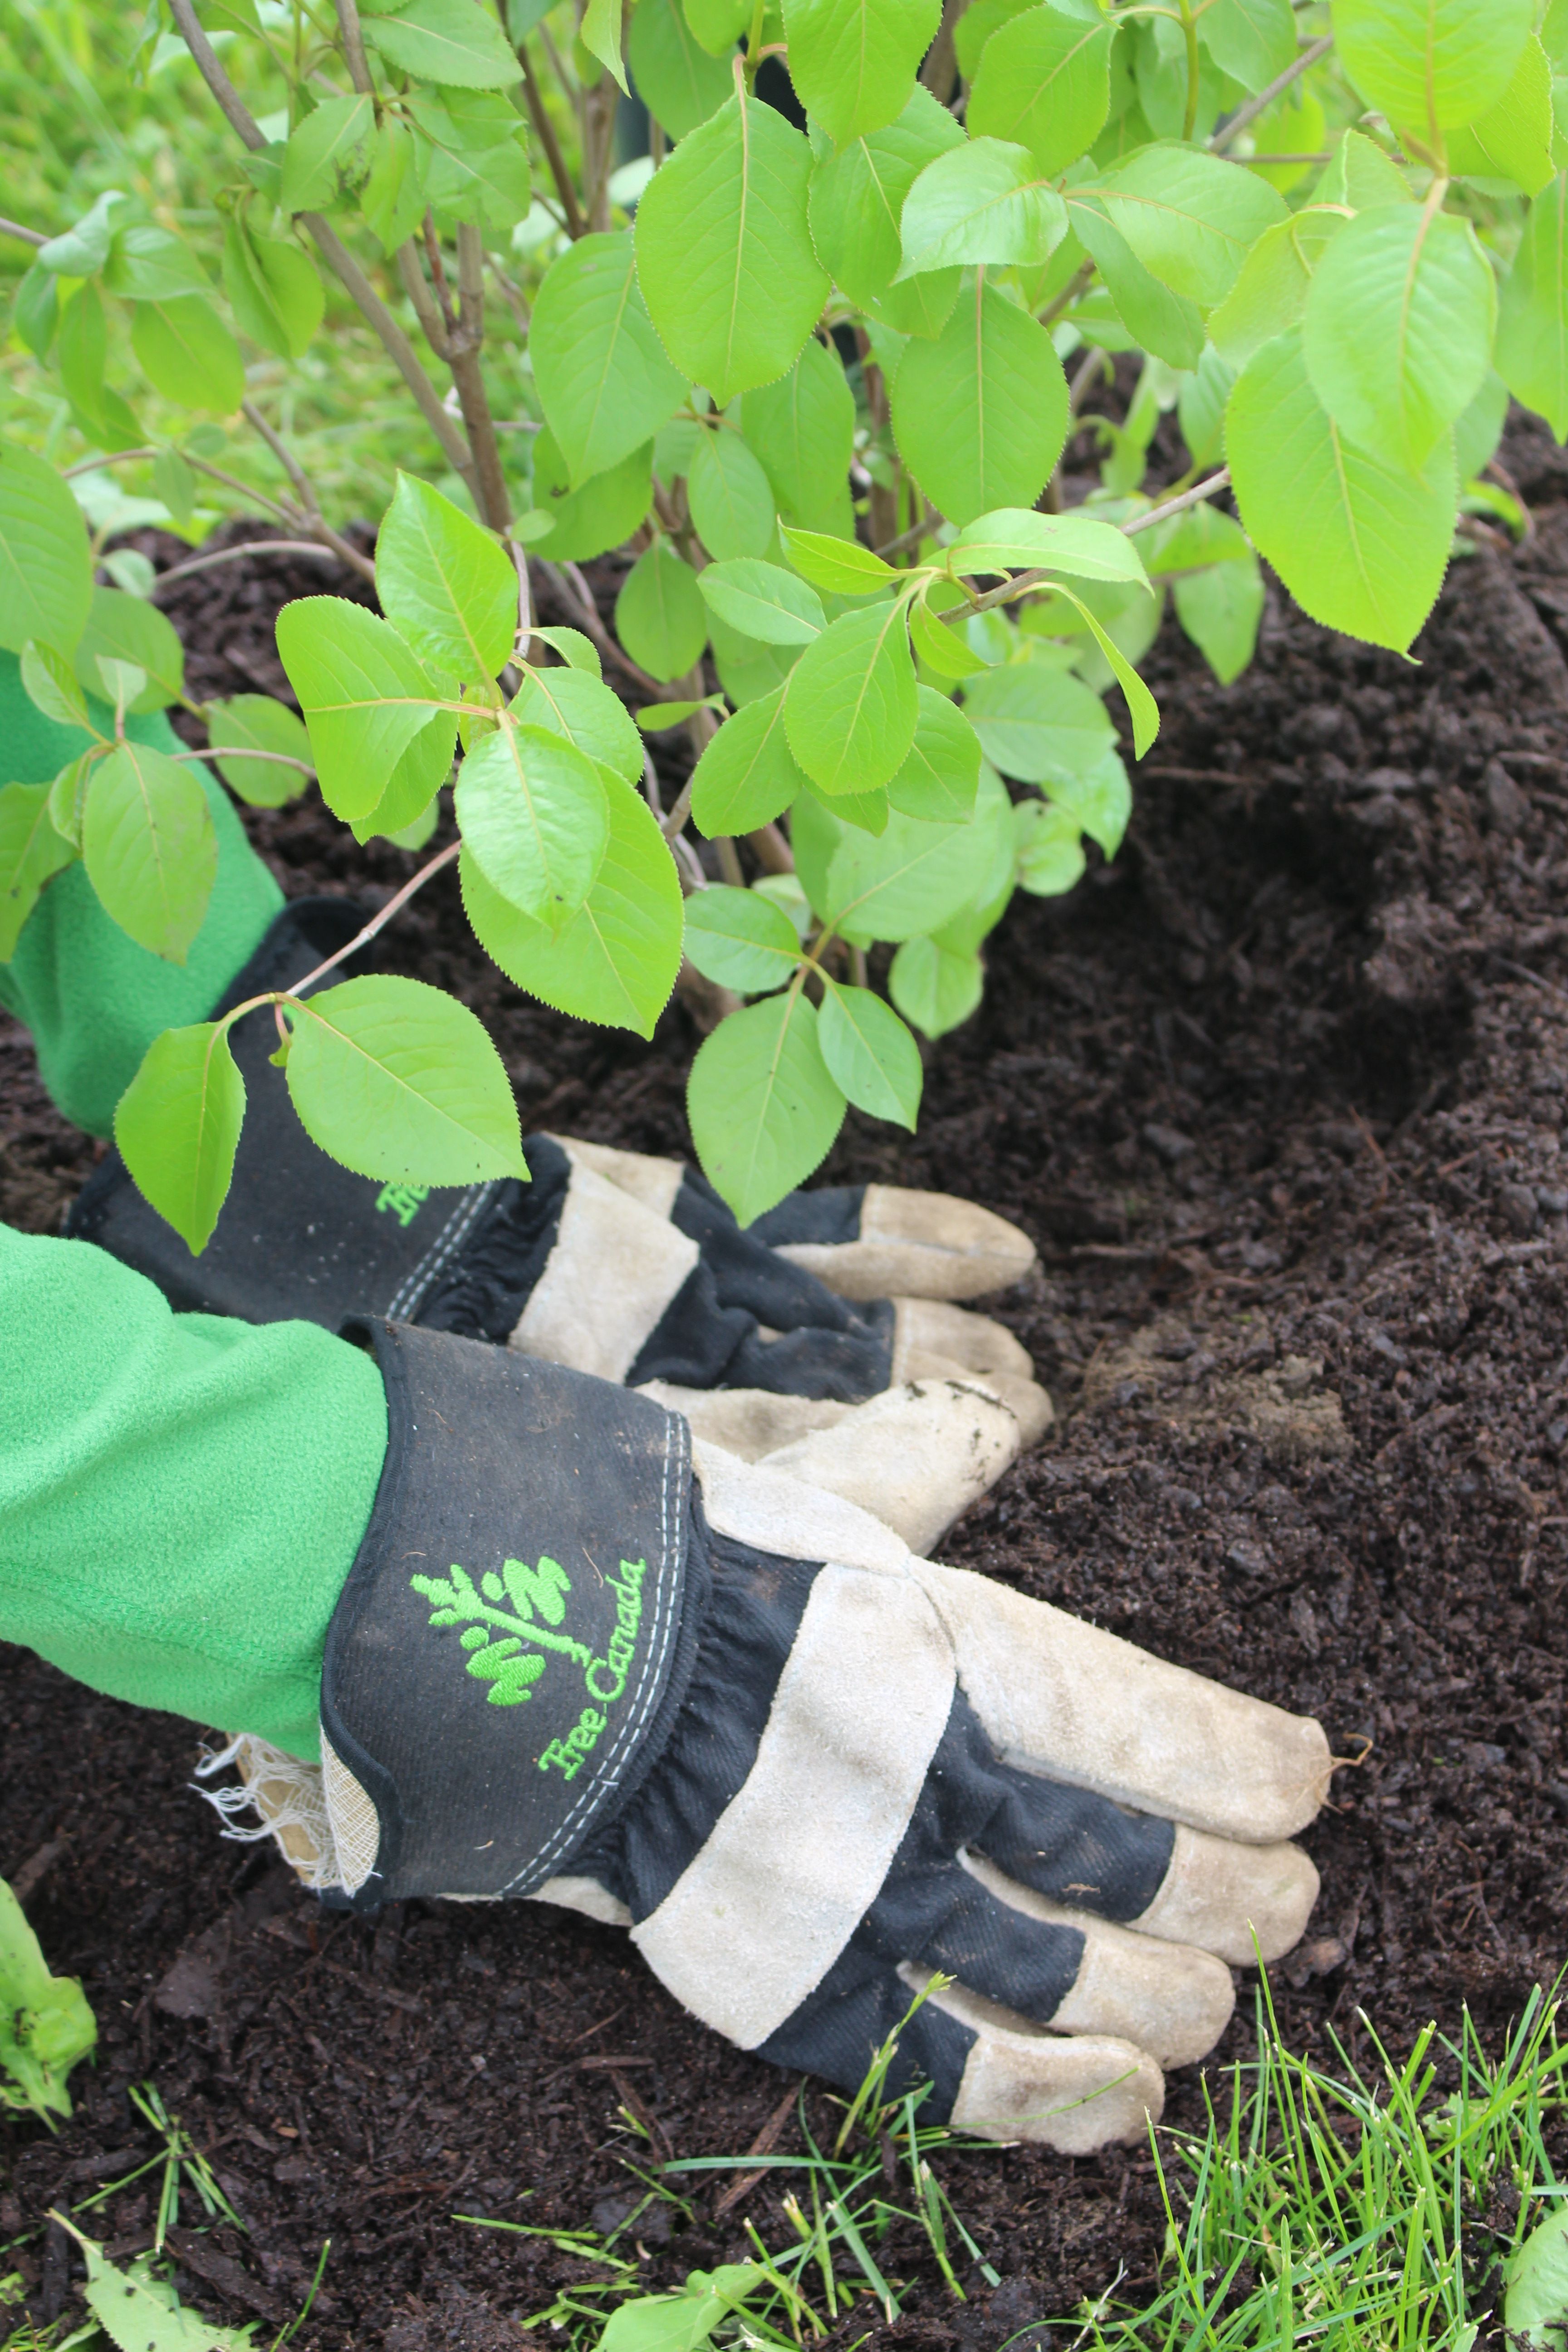 Two hands wearing gardening gloves planting a small tree sapling 